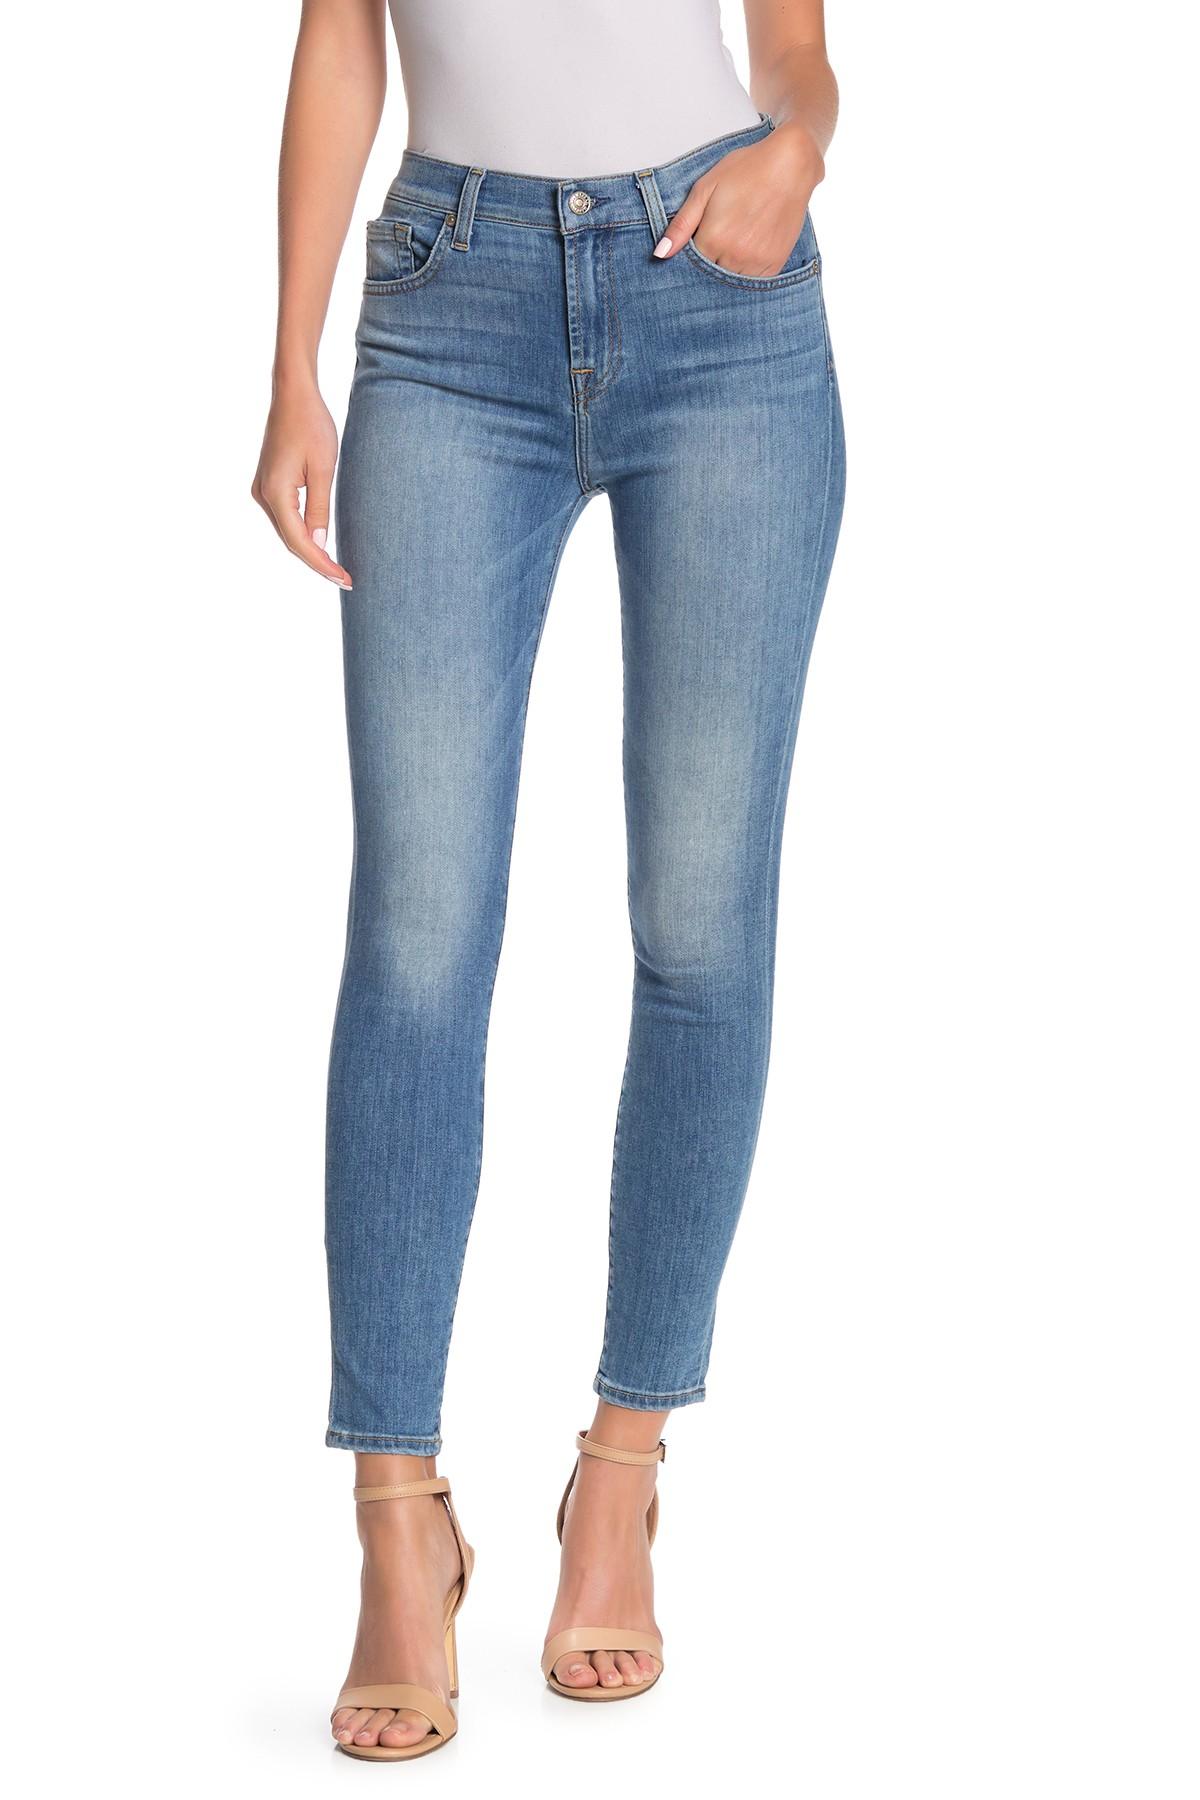 7 For All Mankind Gwenevere High Waist Skinny Ankle Jeans in Blue - Lyst